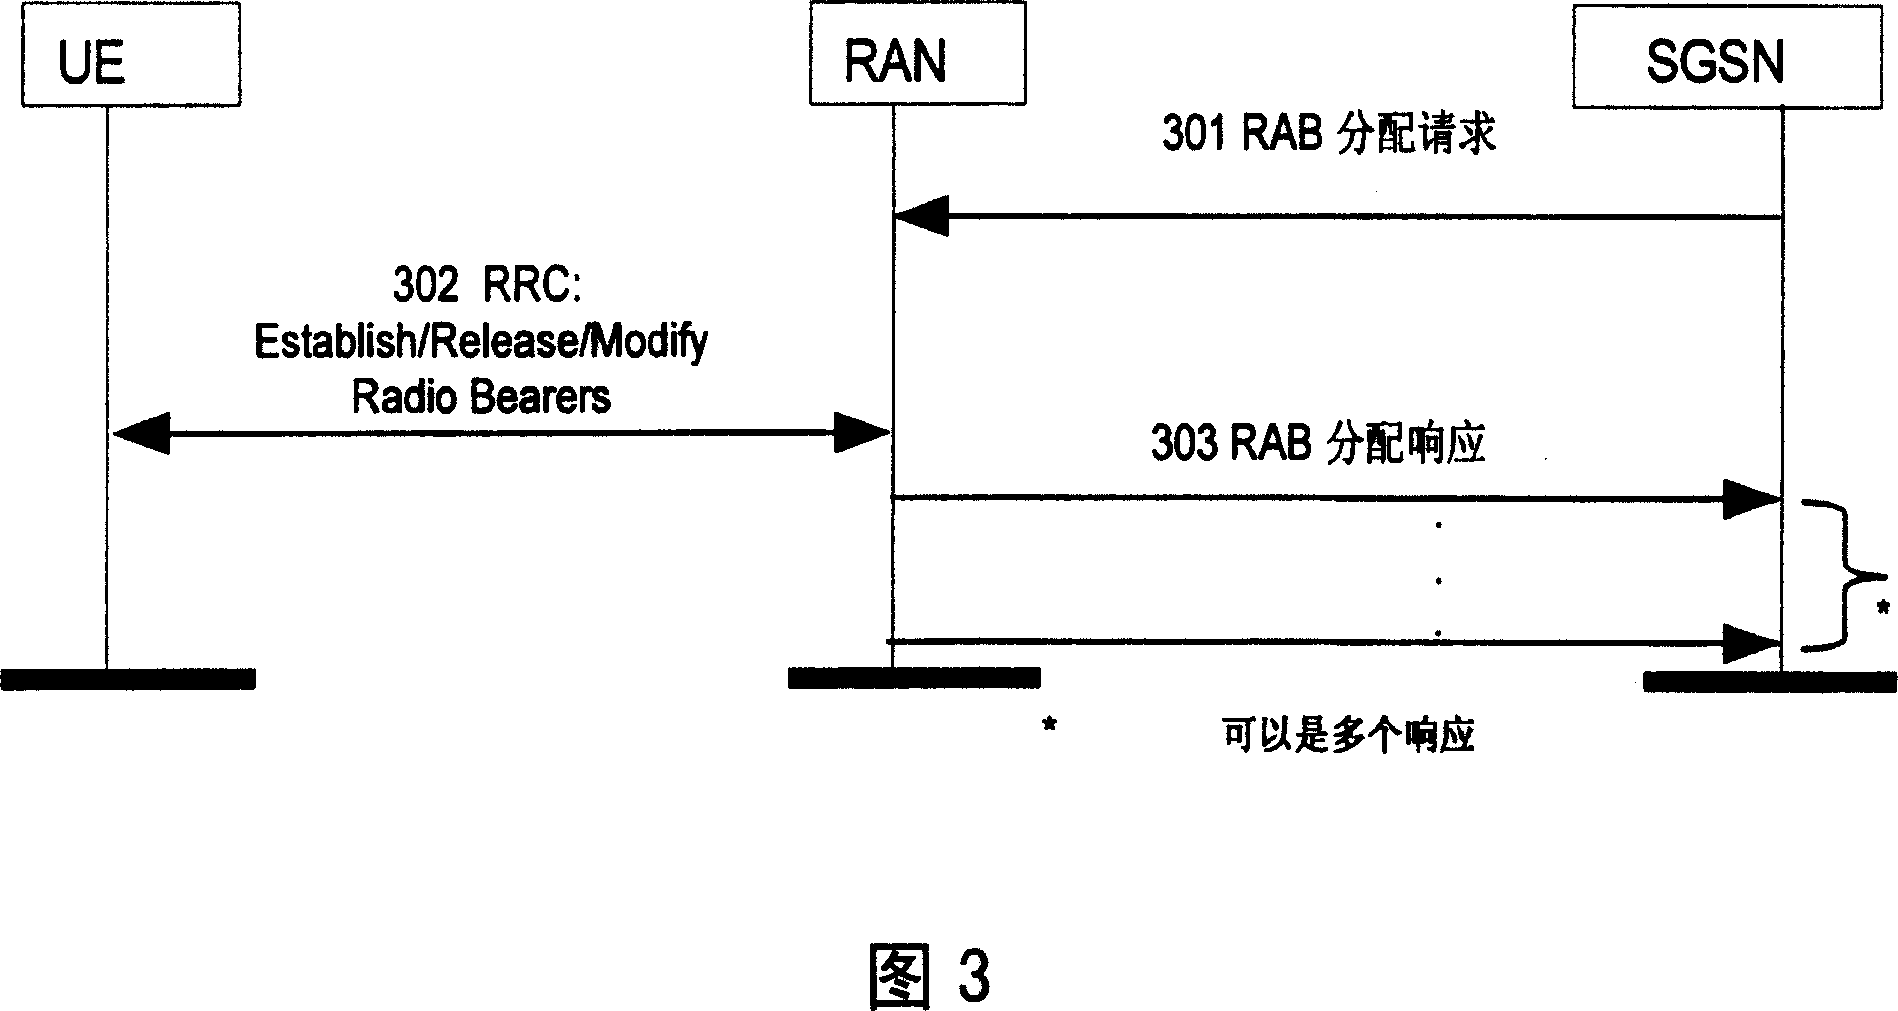 Session accessing method in LTE system